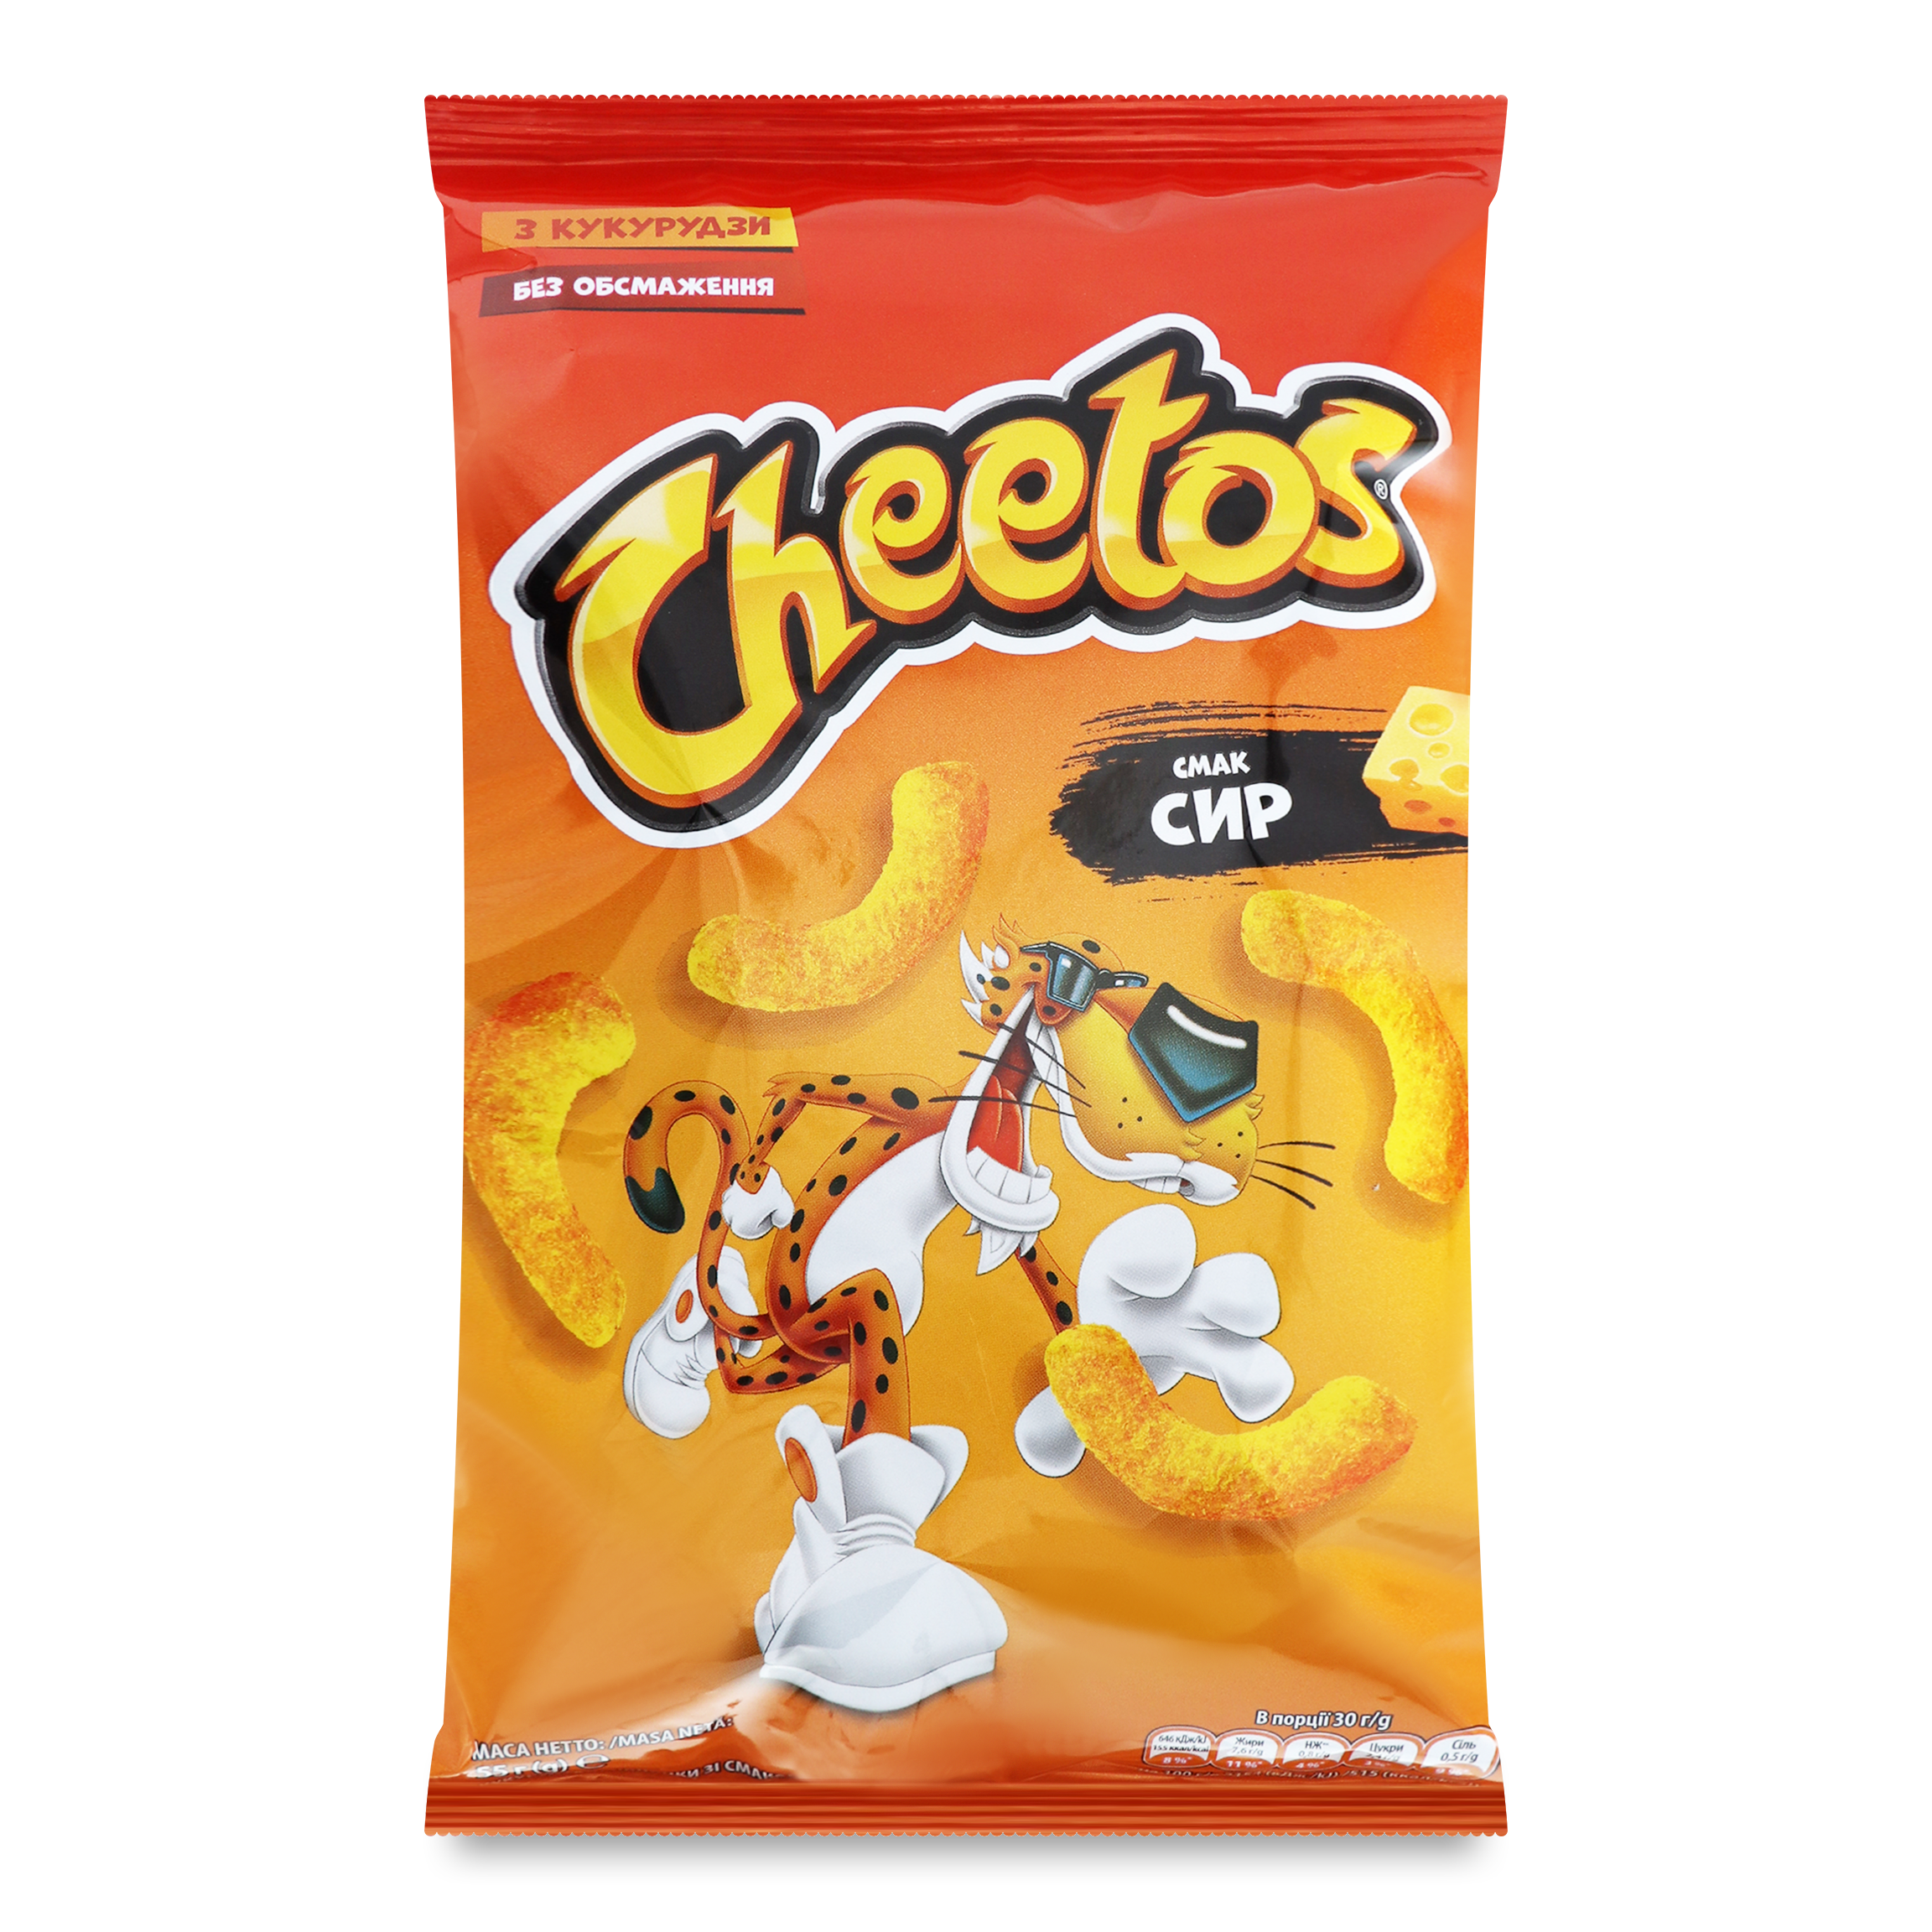 Cheetos corn sticks with the taste of cheese 55g